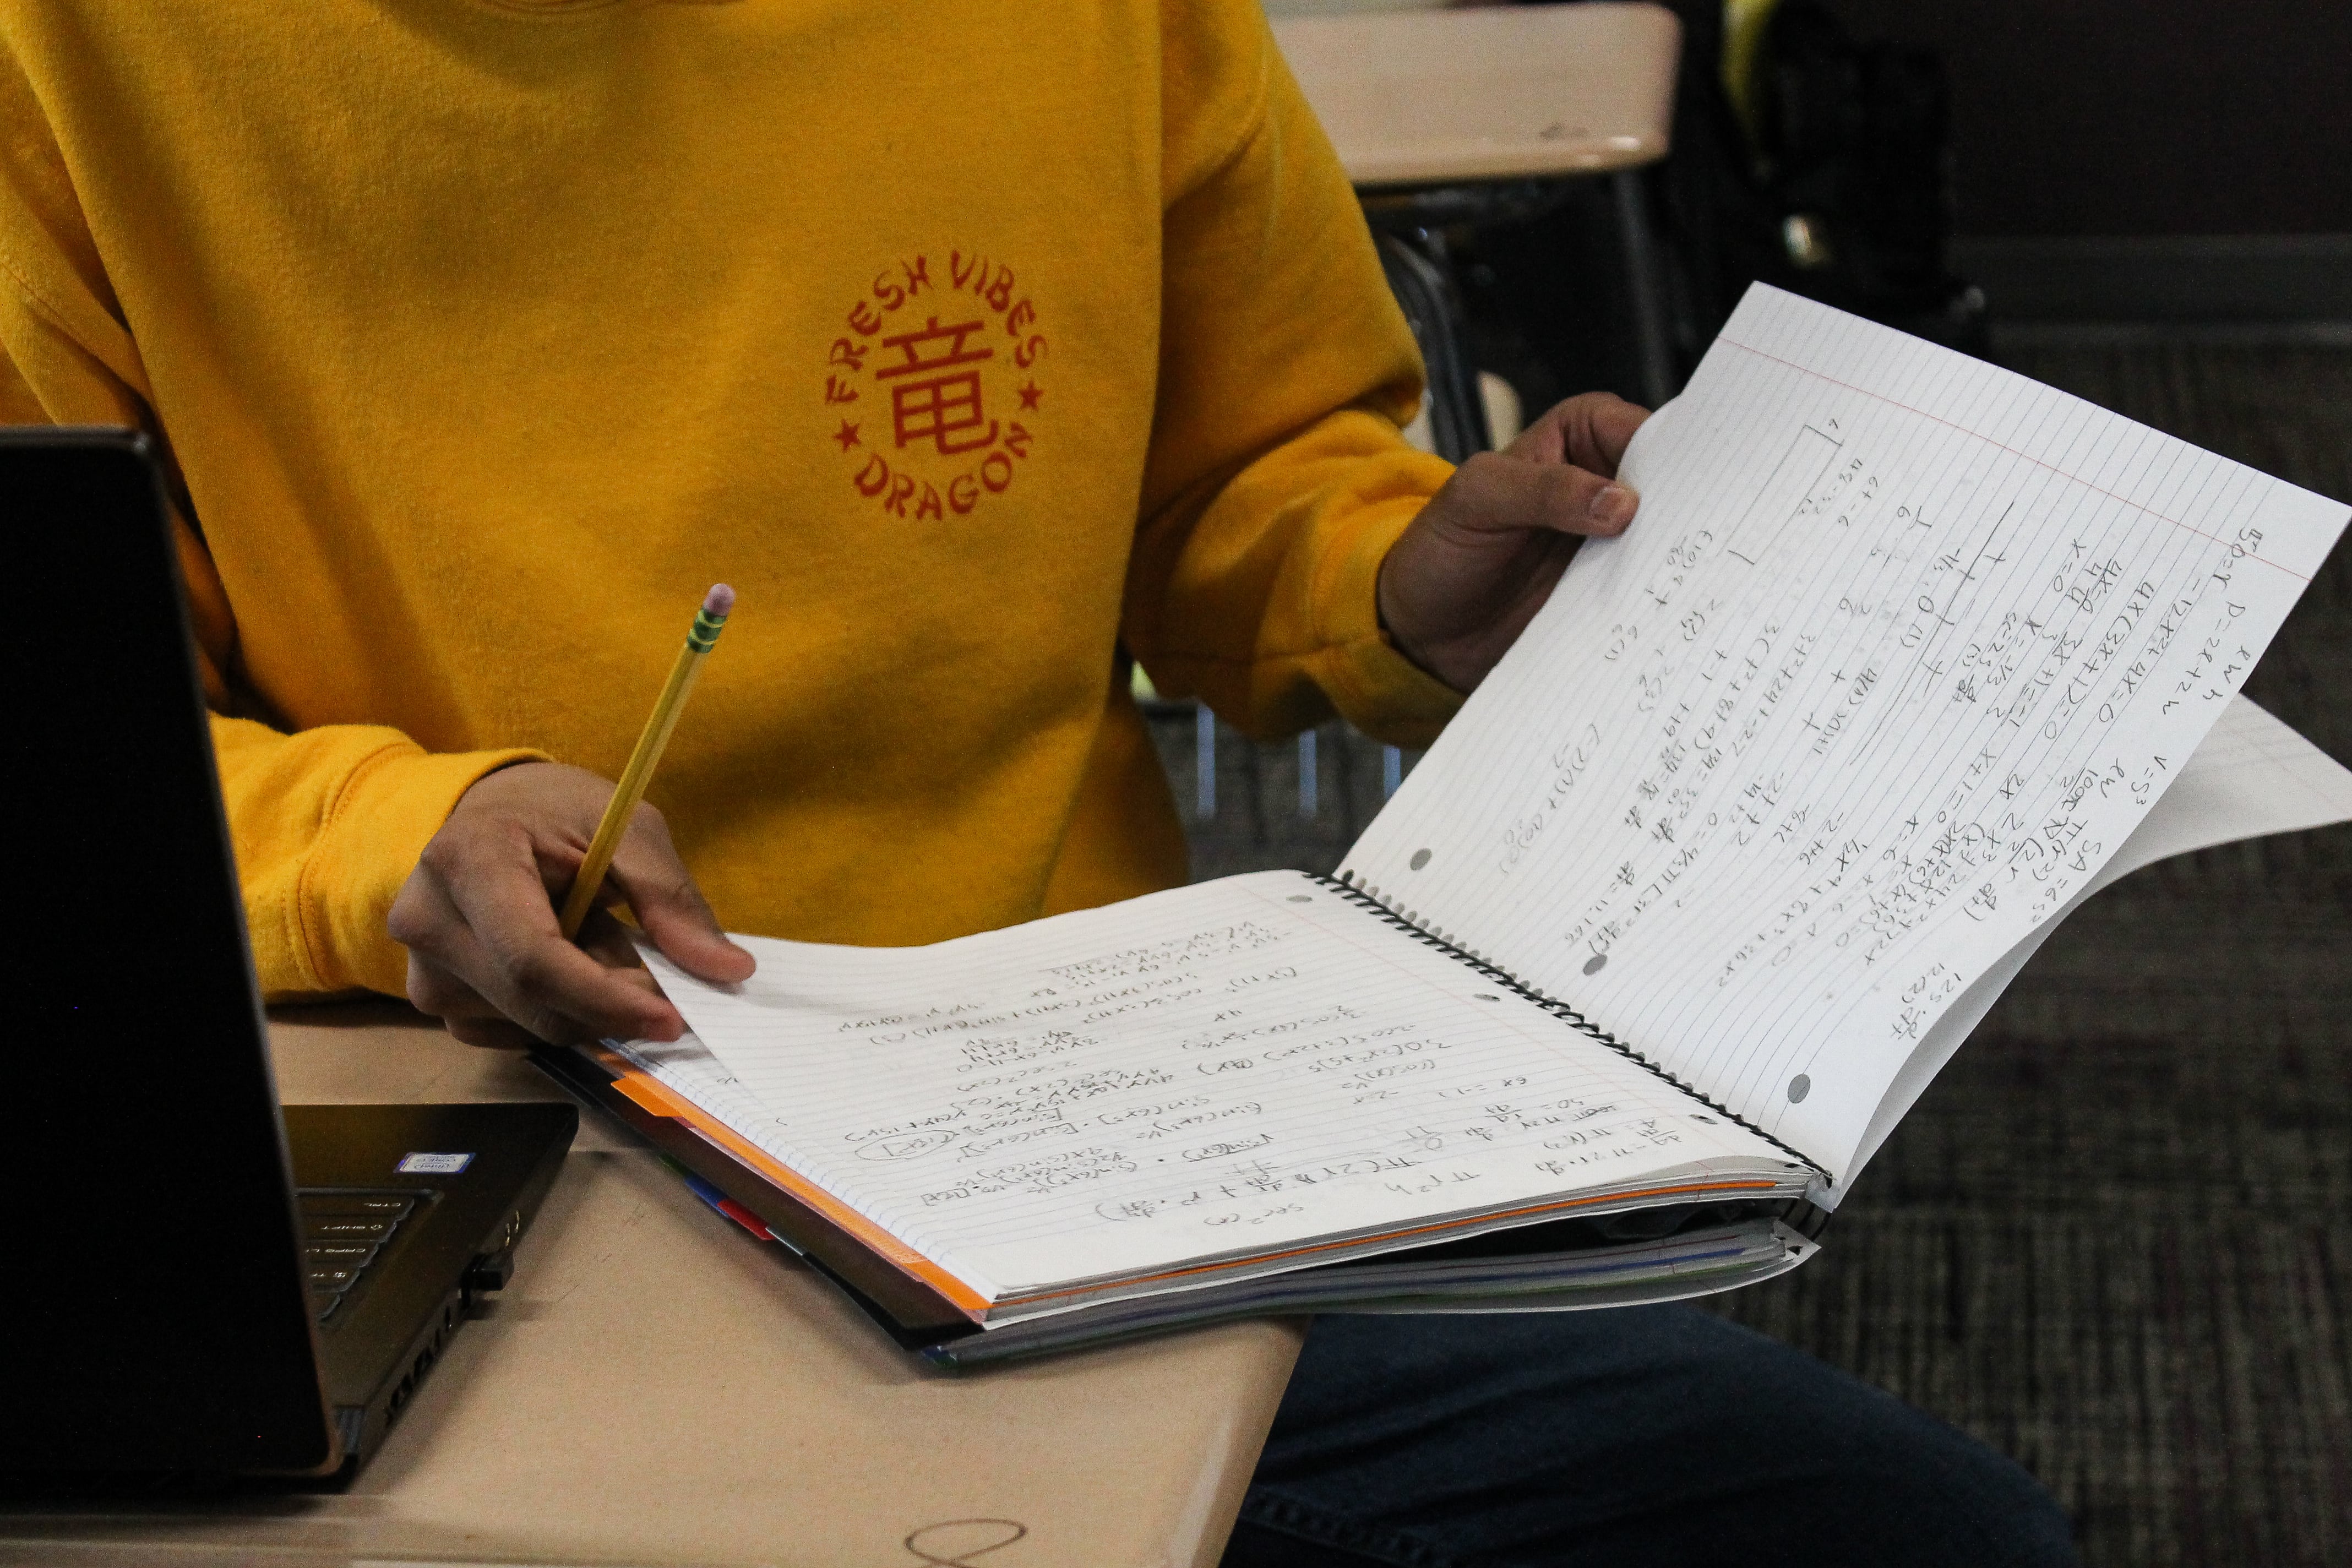 A student in a yellow sweatshirt opens a notebook at their desk.